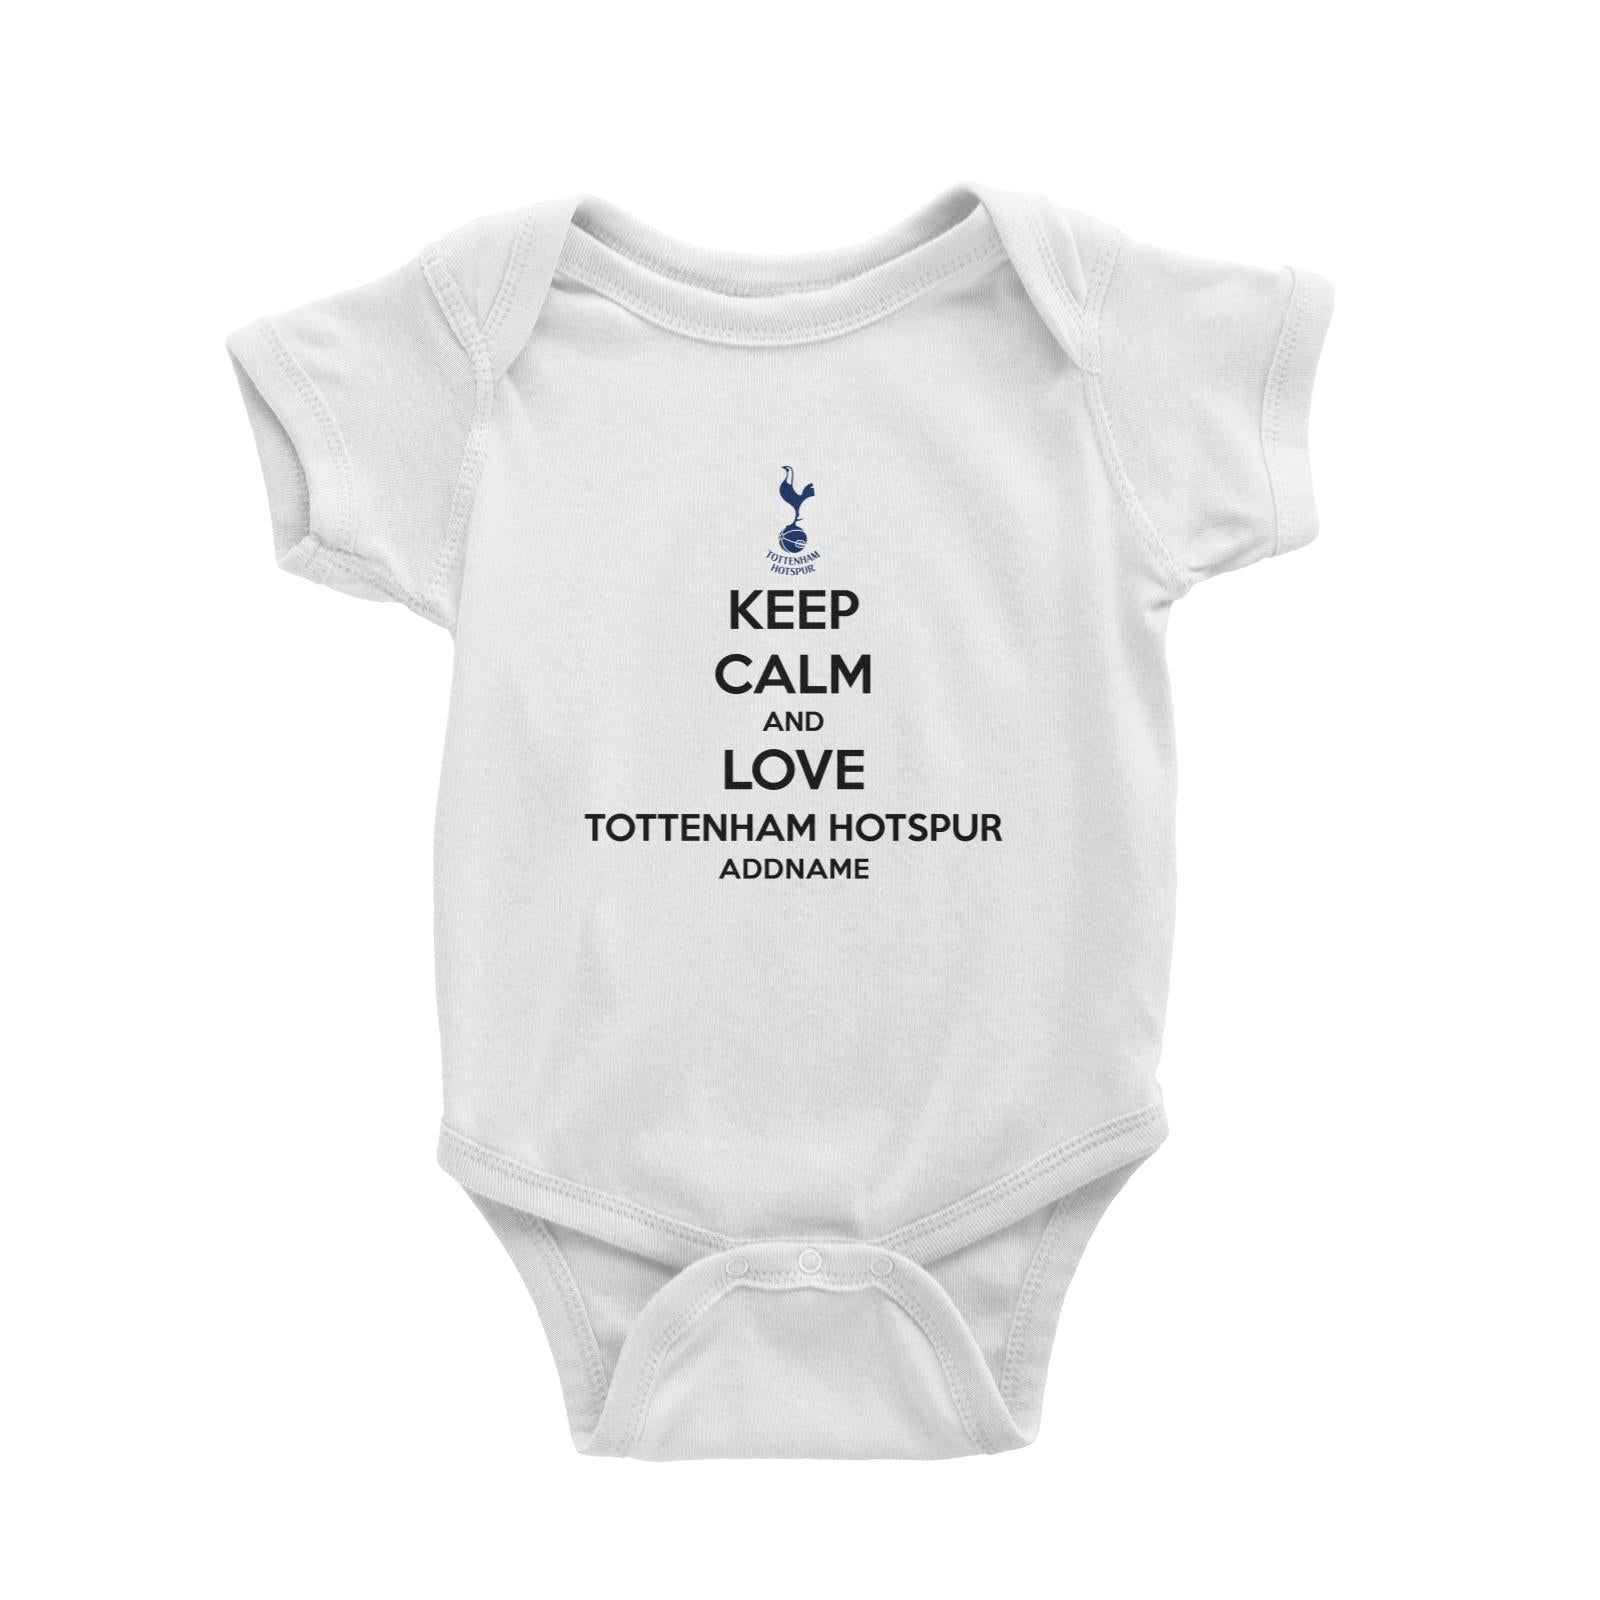 Tottenham Hotspur Football Keep Calm And Love Series Addname Baby Romper